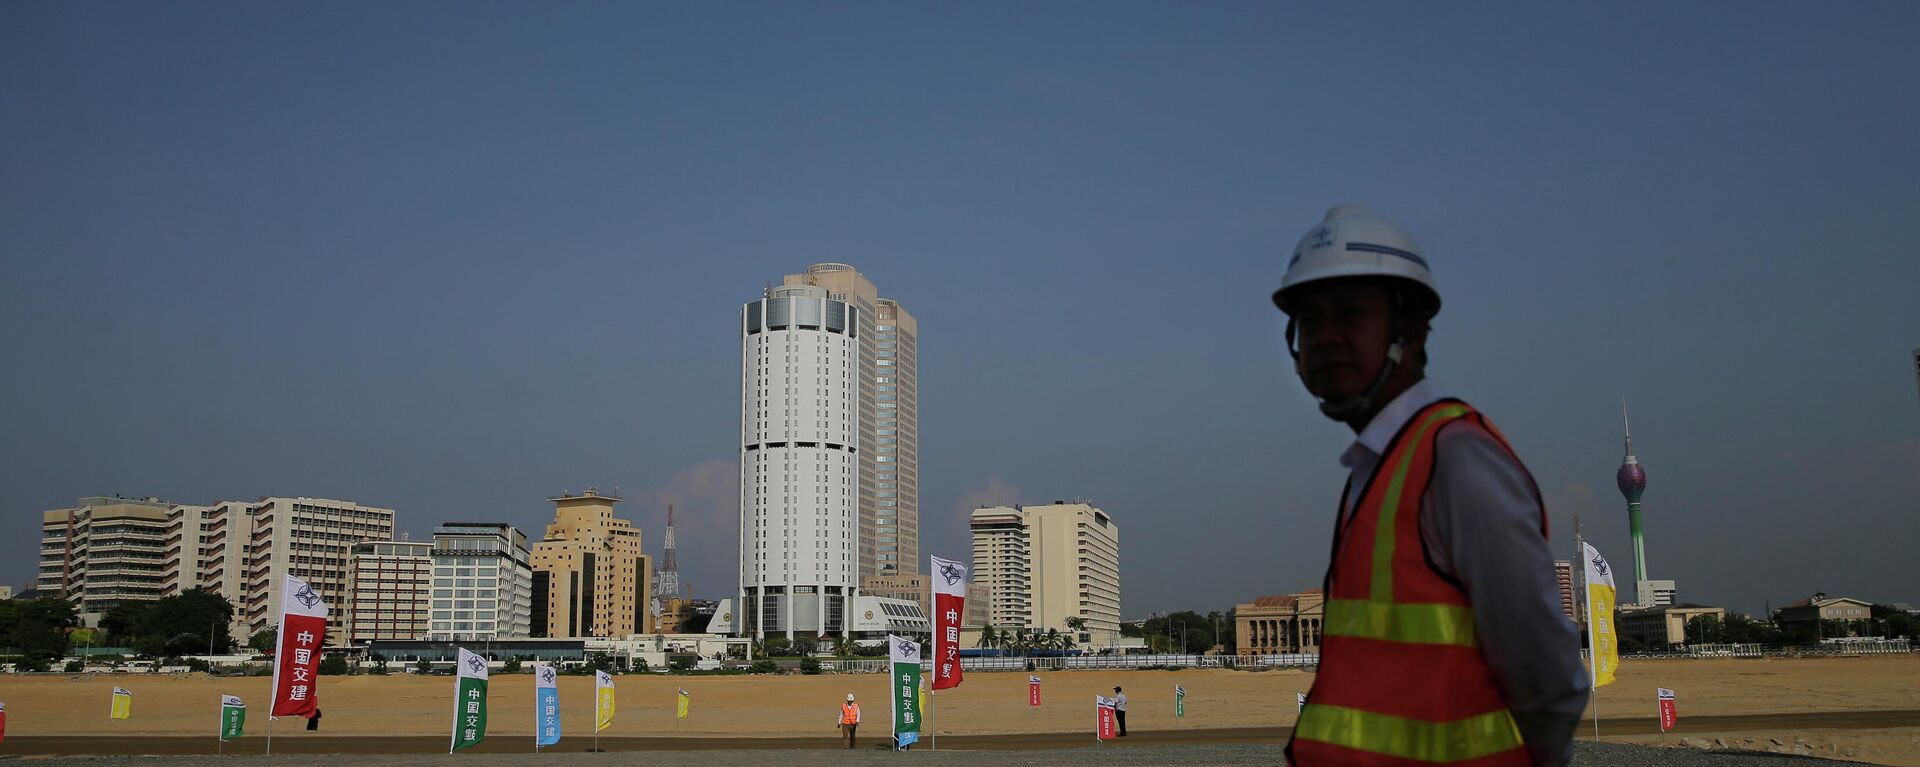  In this Jan. 2, 2018, file photo, a Chinese construction worker stands on land that was reclaimed from the Indian Ocean for the Colombo Port City project, initiated as part of China's ambitious One Belt One Road initiative, in Colombo, Sri Lanka. - Sputnik International, 1920, 27.06.2022